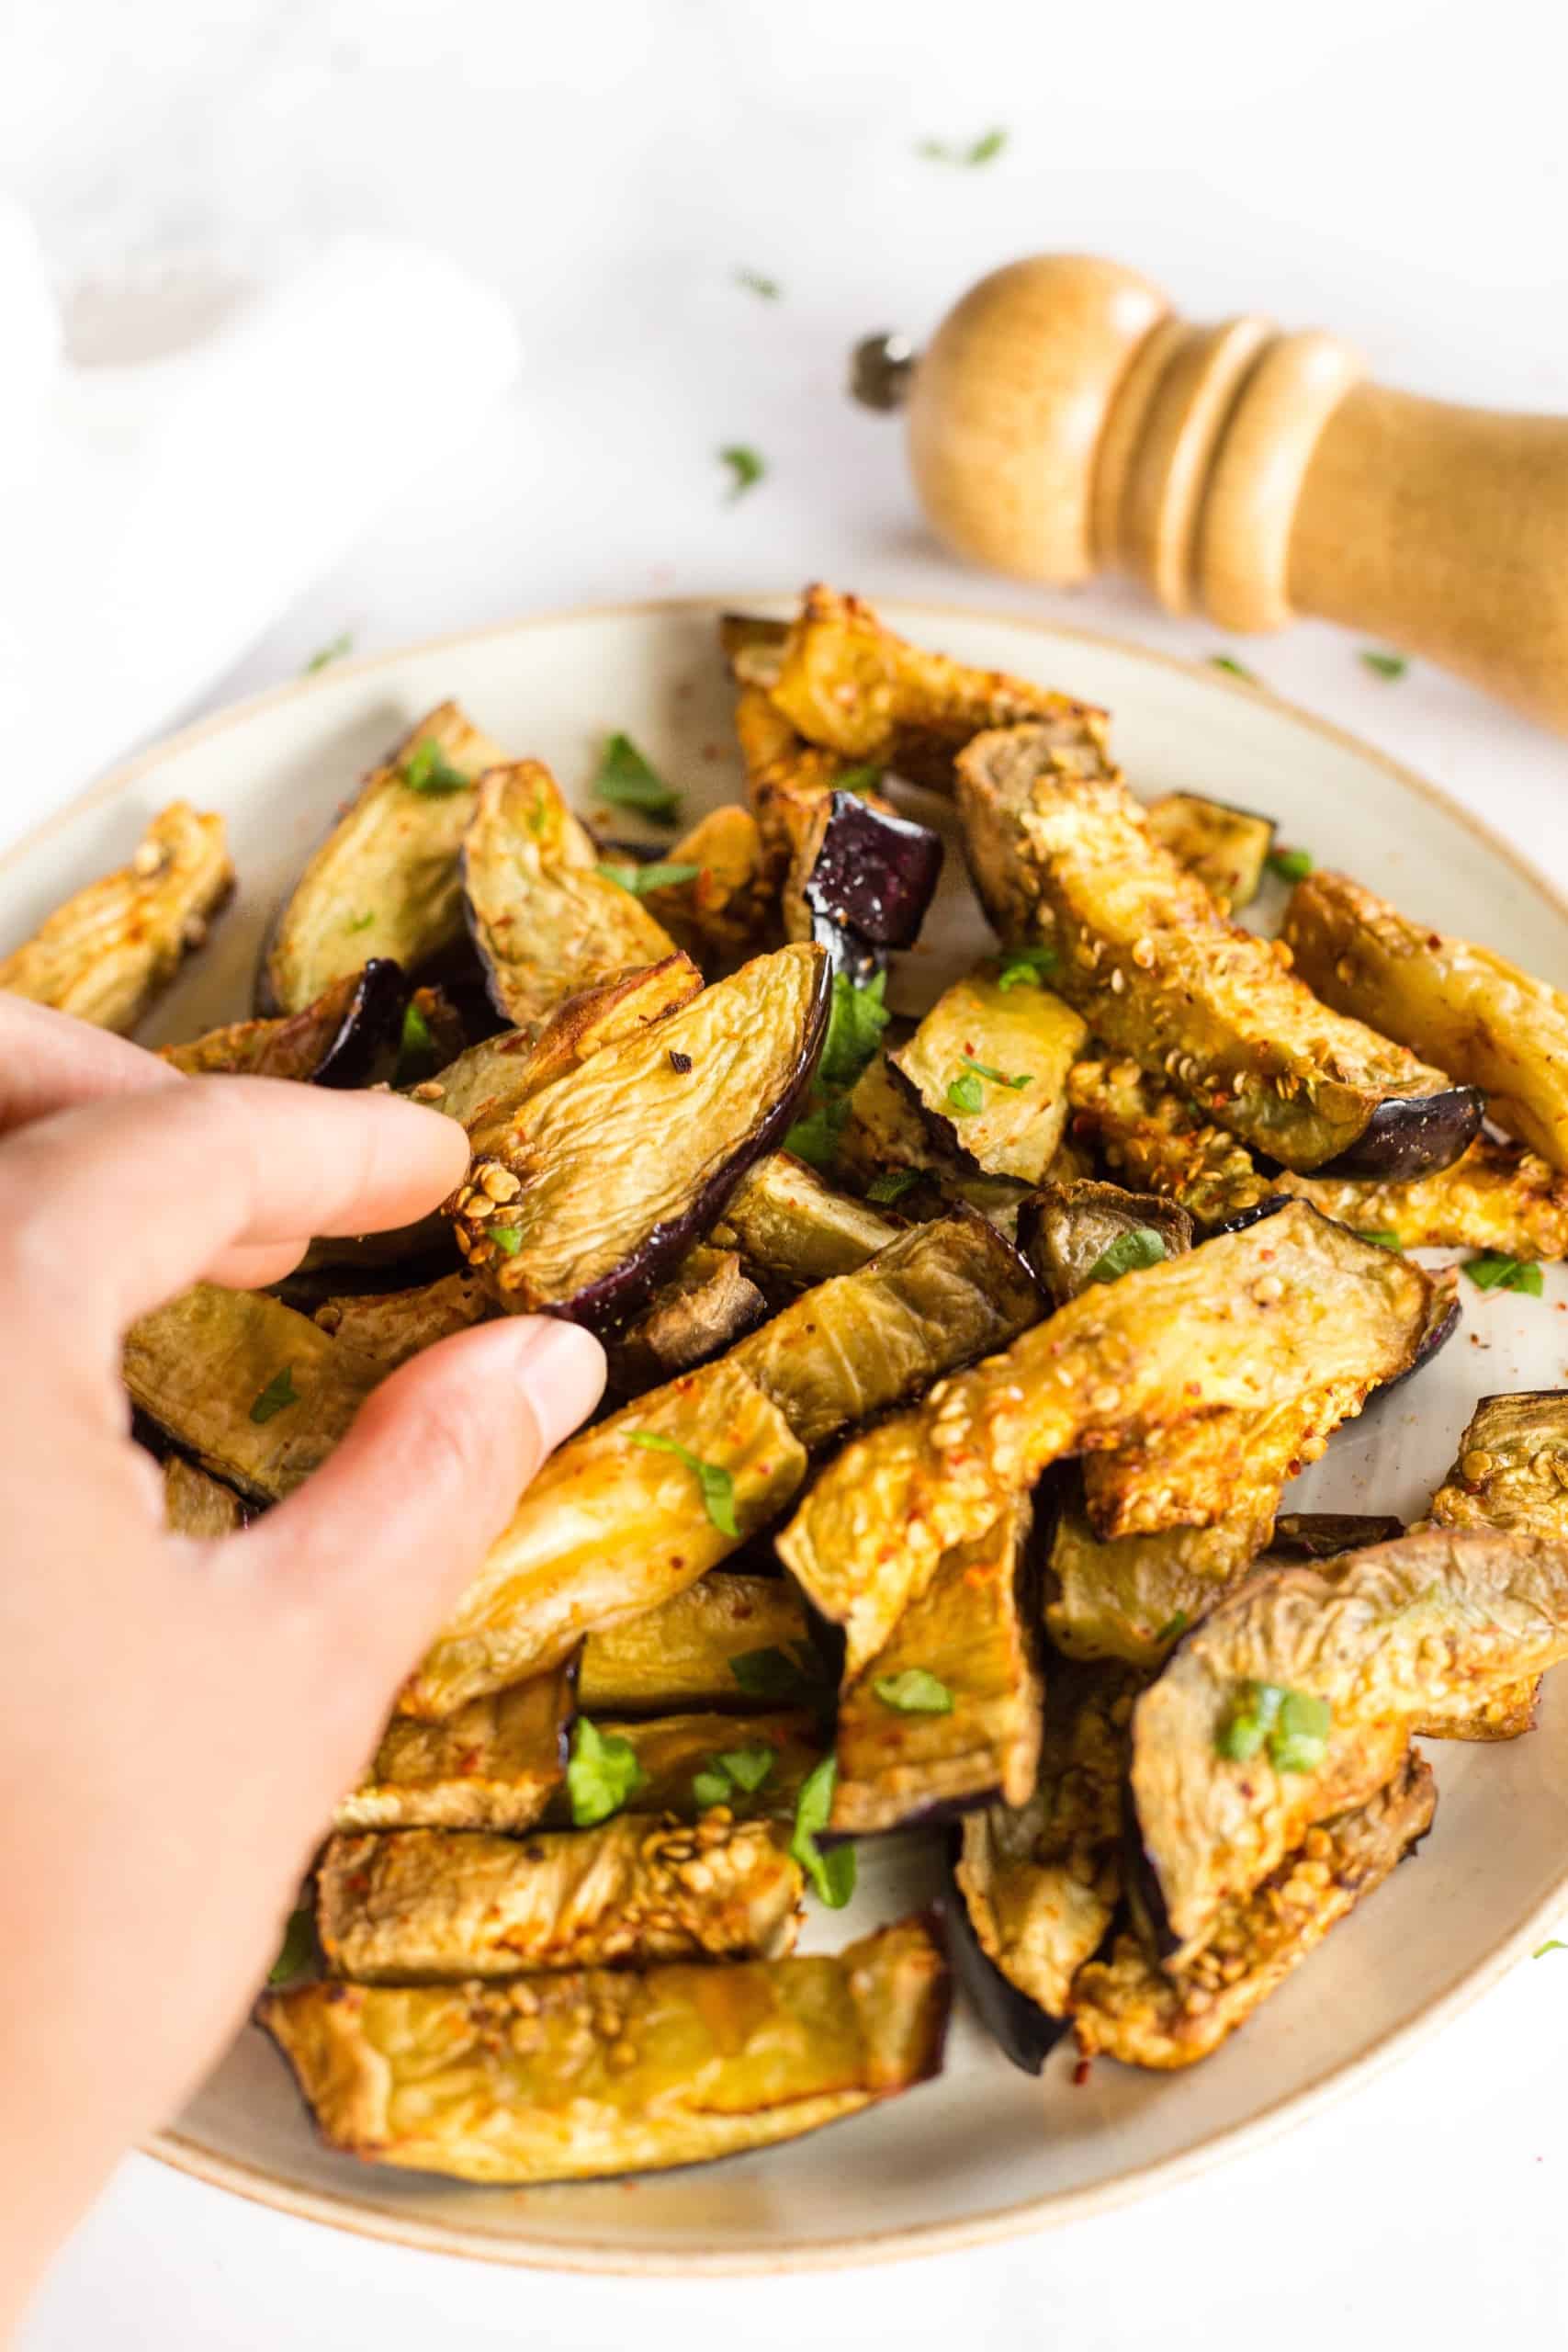 Hand reaching for a piece of air fried eggplant.